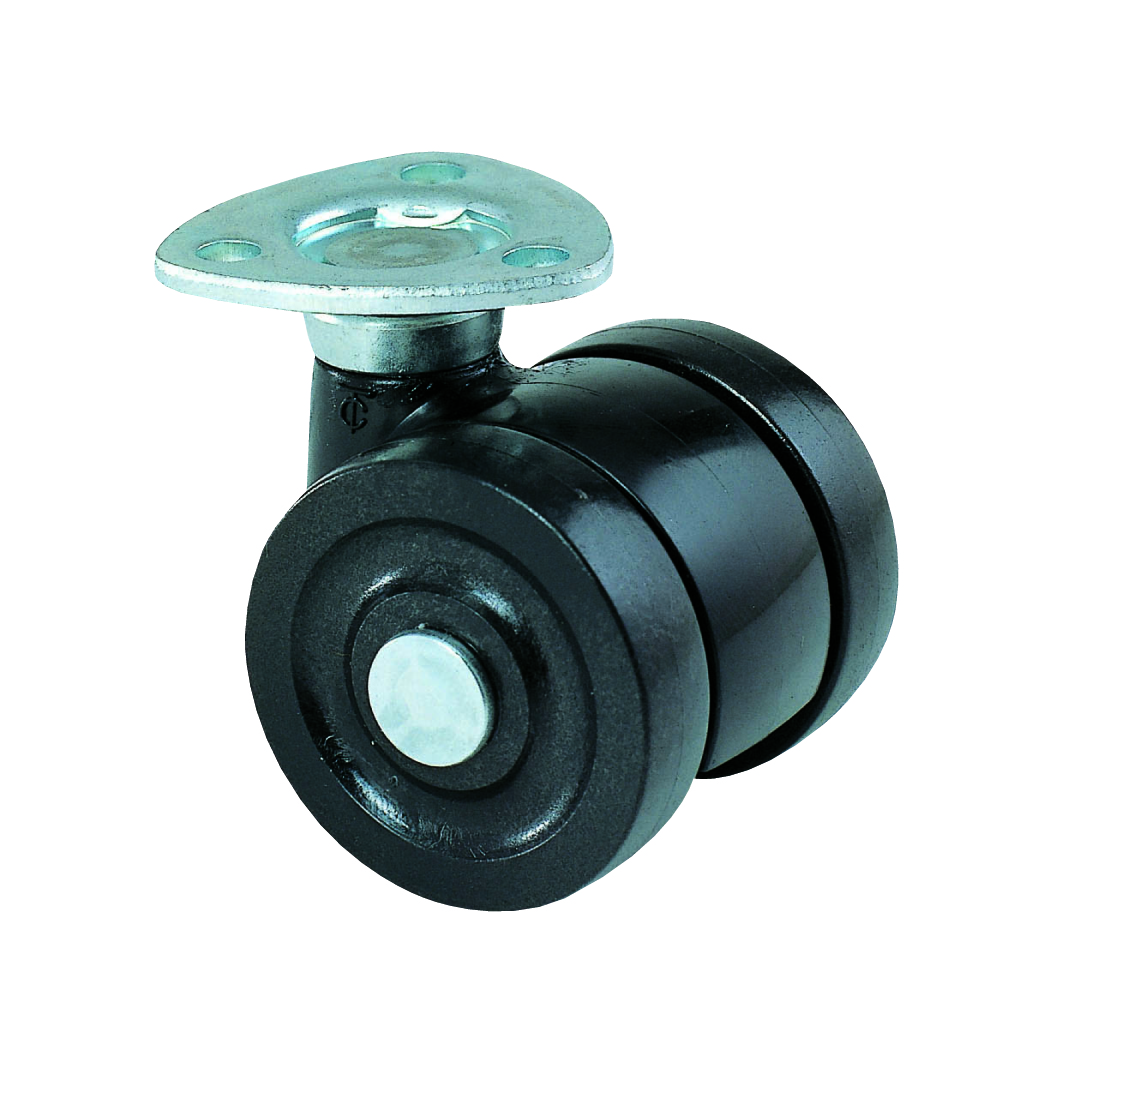 Casters - With swivel plate, reinforced plastic double caster, without brake, TX40/TX50 series. TX40